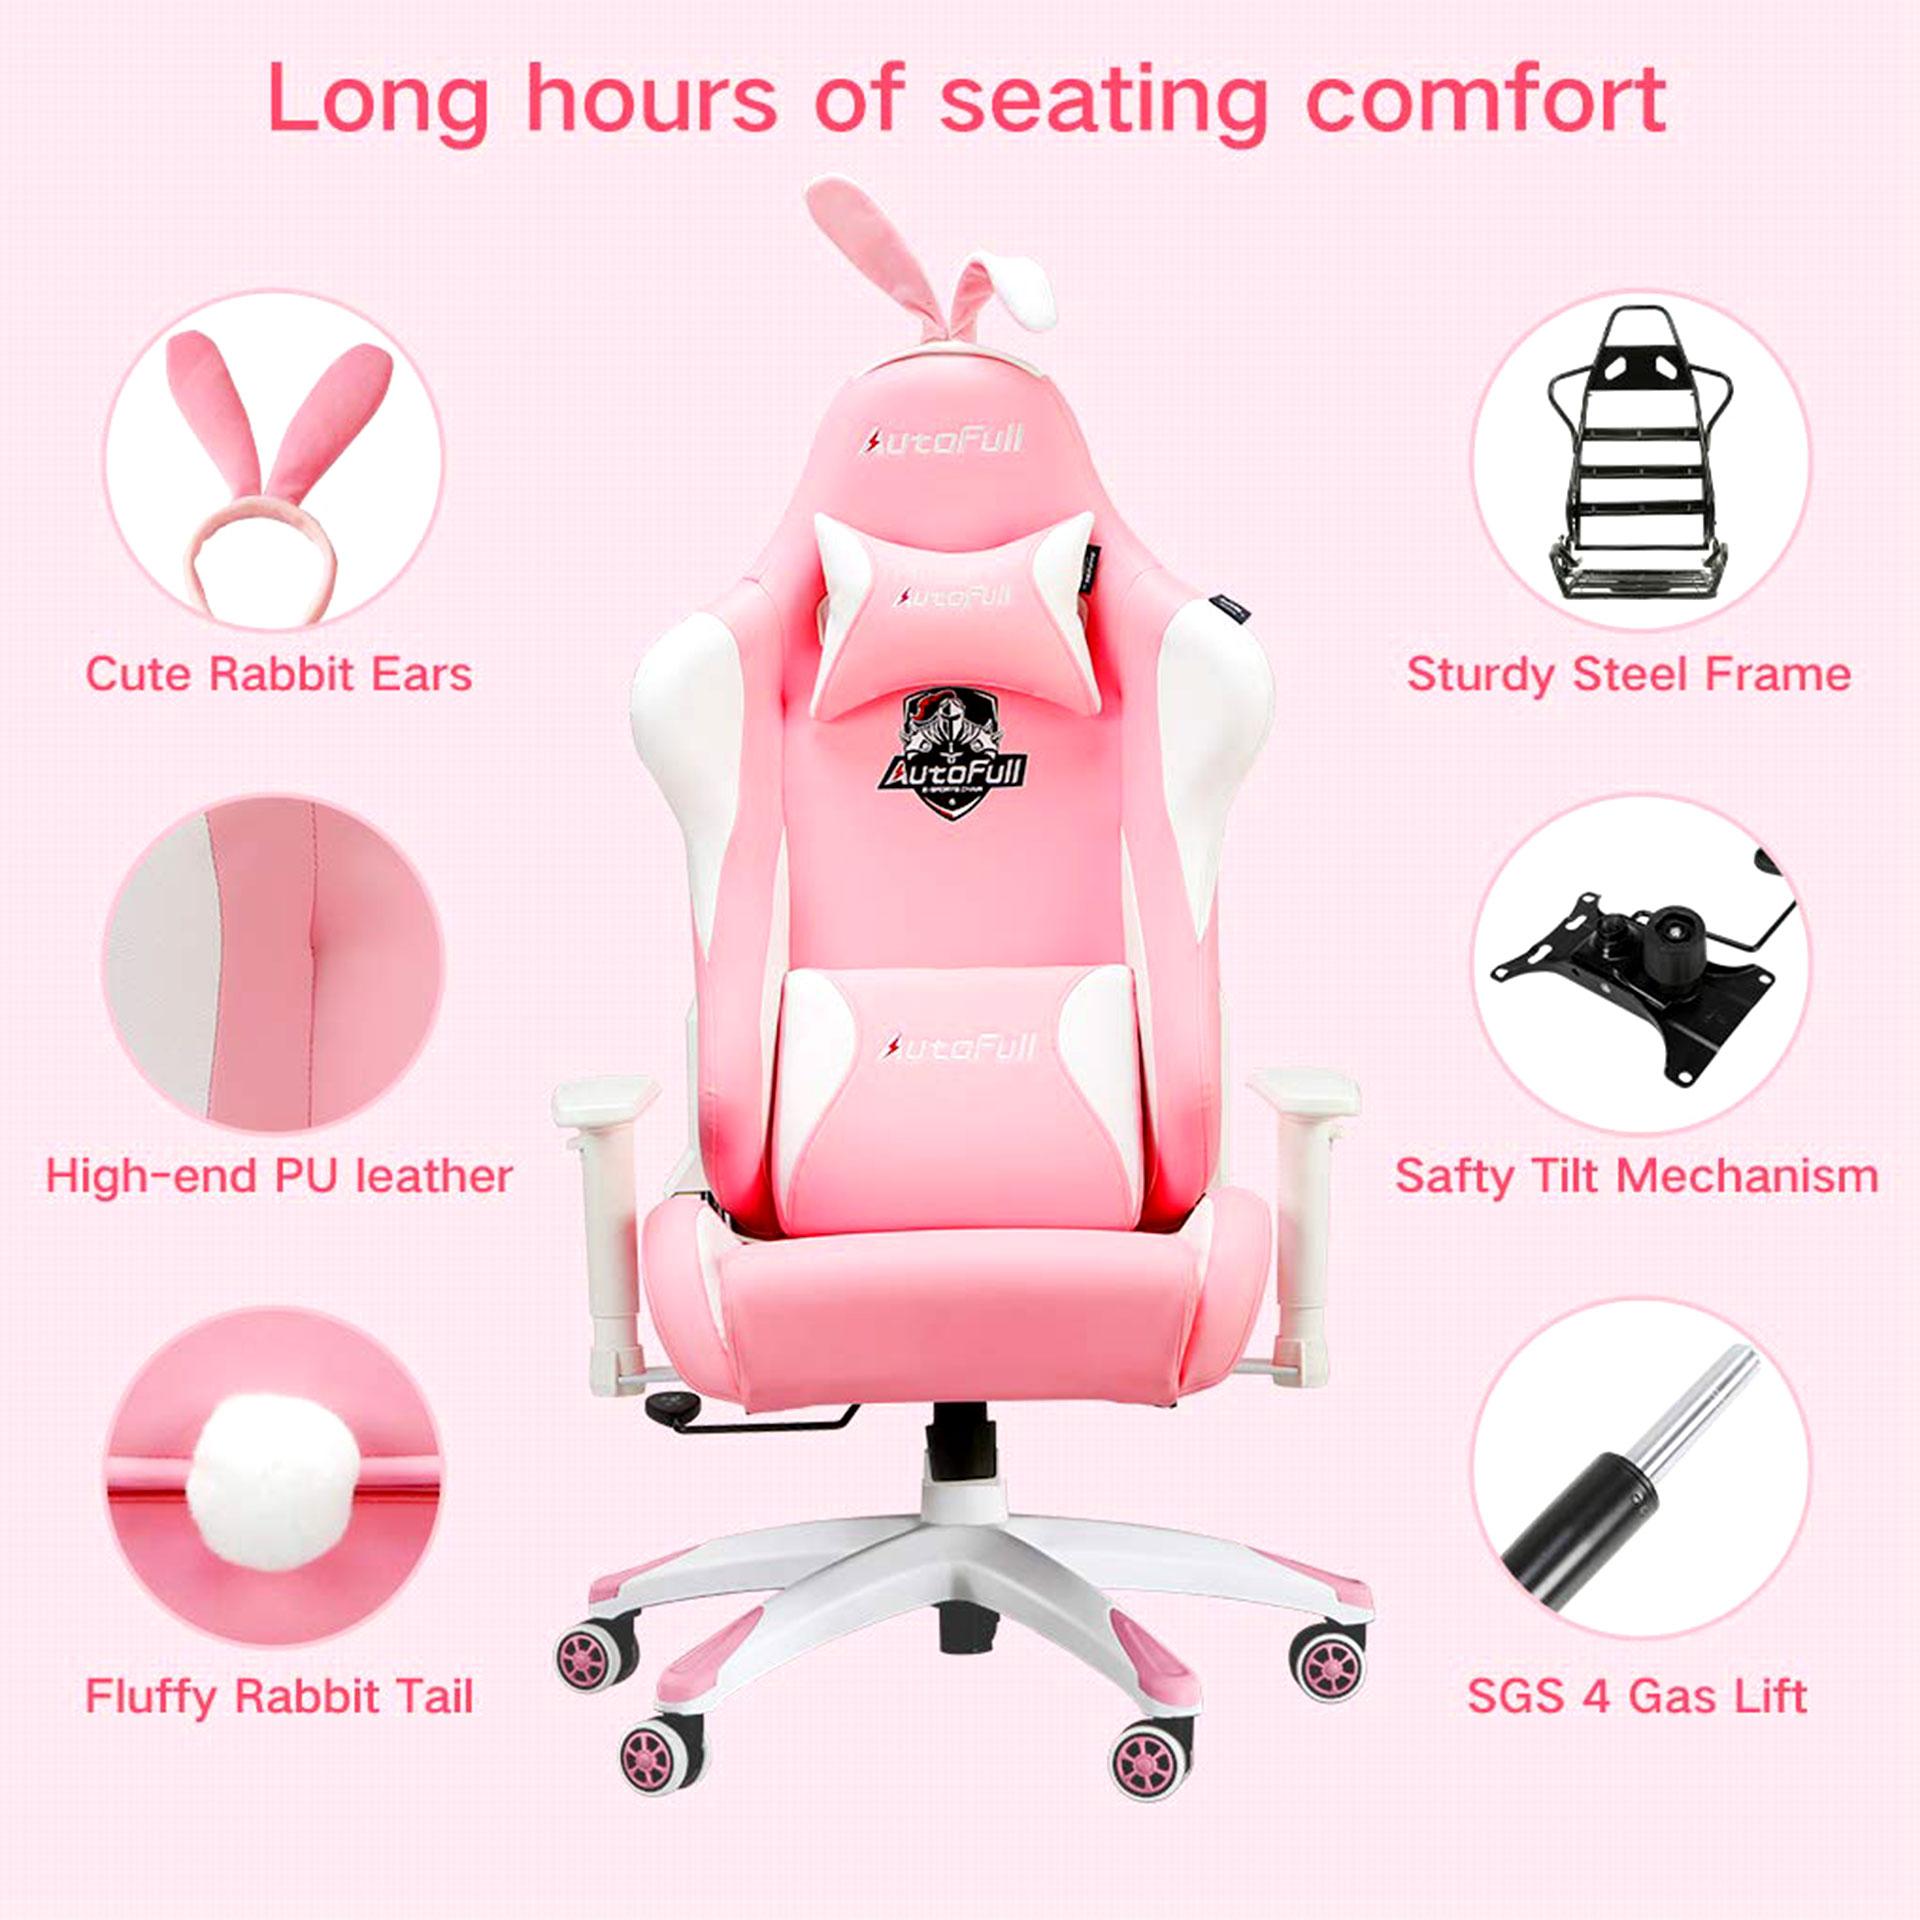 Best Authorized Brands Gaming Chair, AutoFull Chair for Game, AutoFull